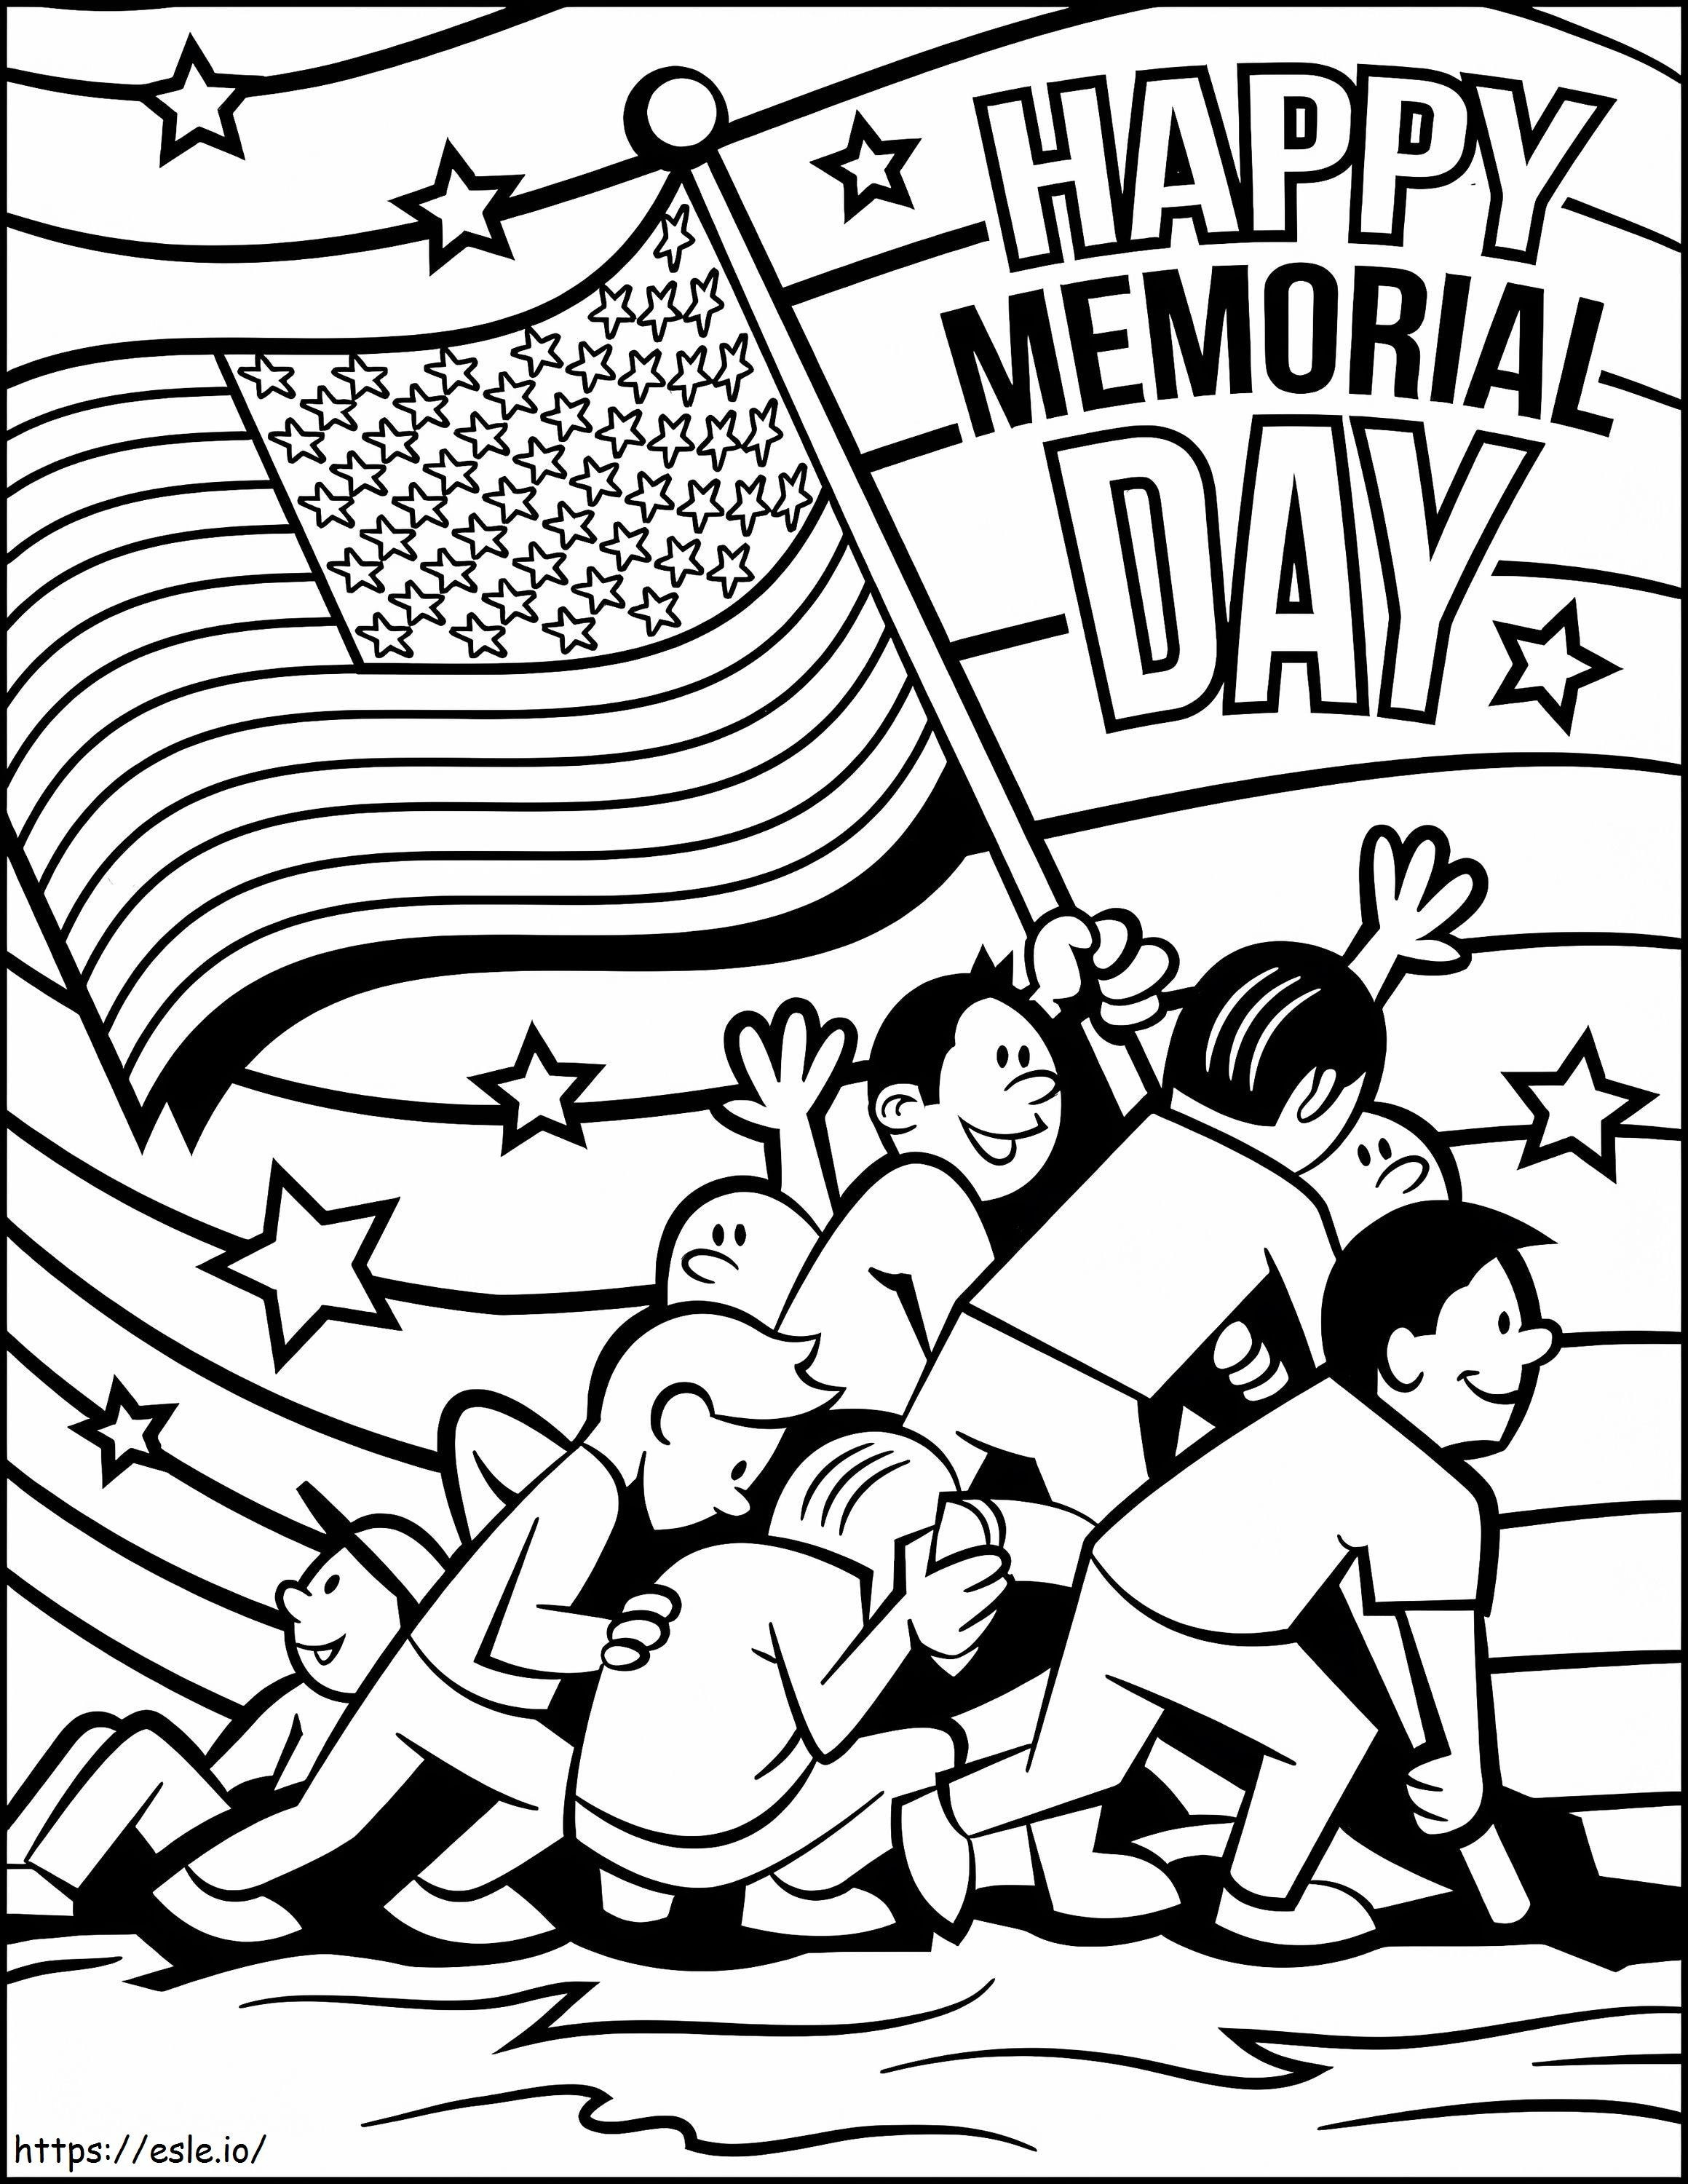 Memorial Day 1 coloring page